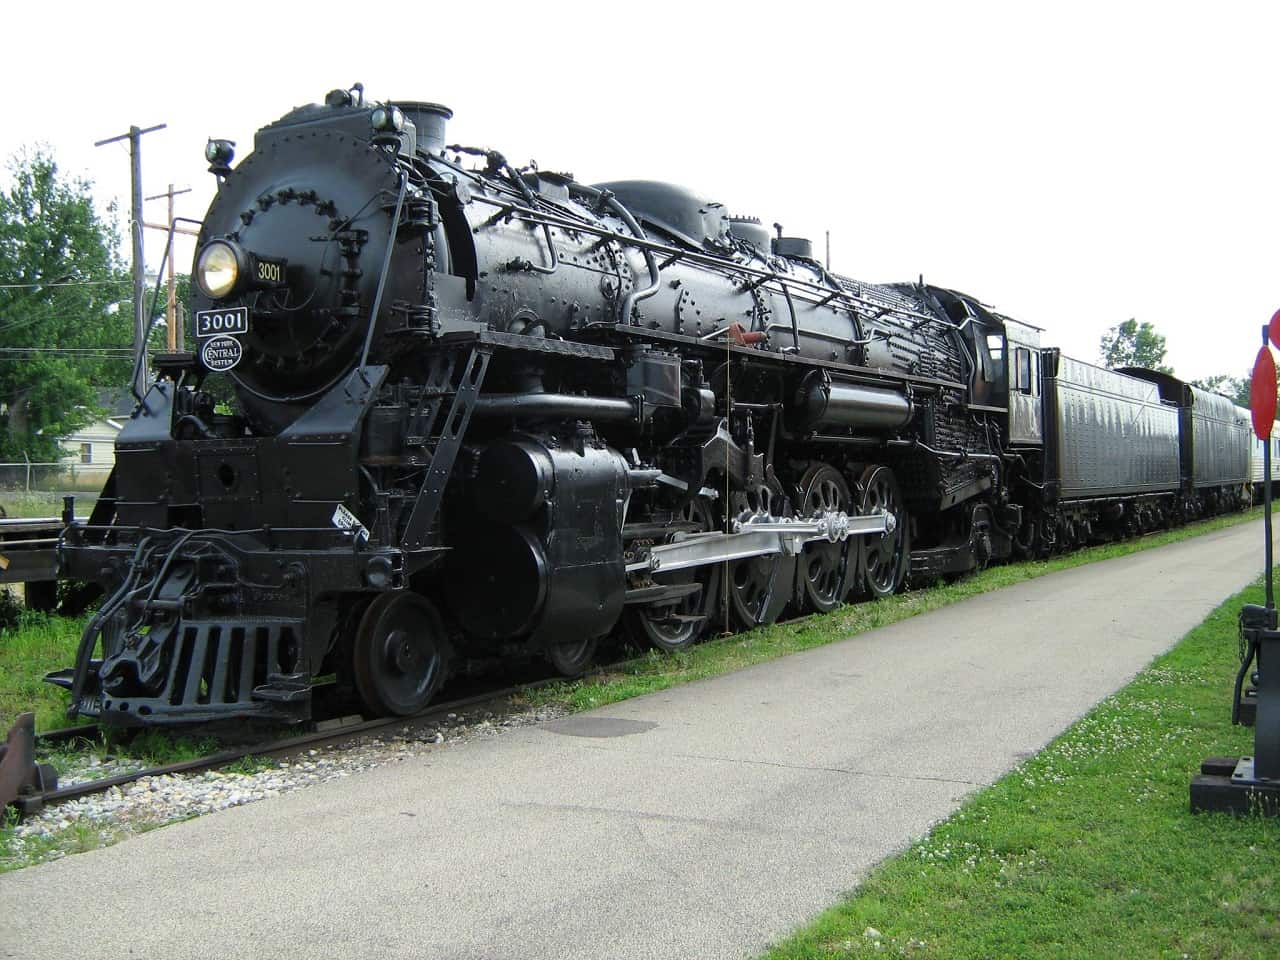 National New York Central Railroad Museum - Elkhart, IN